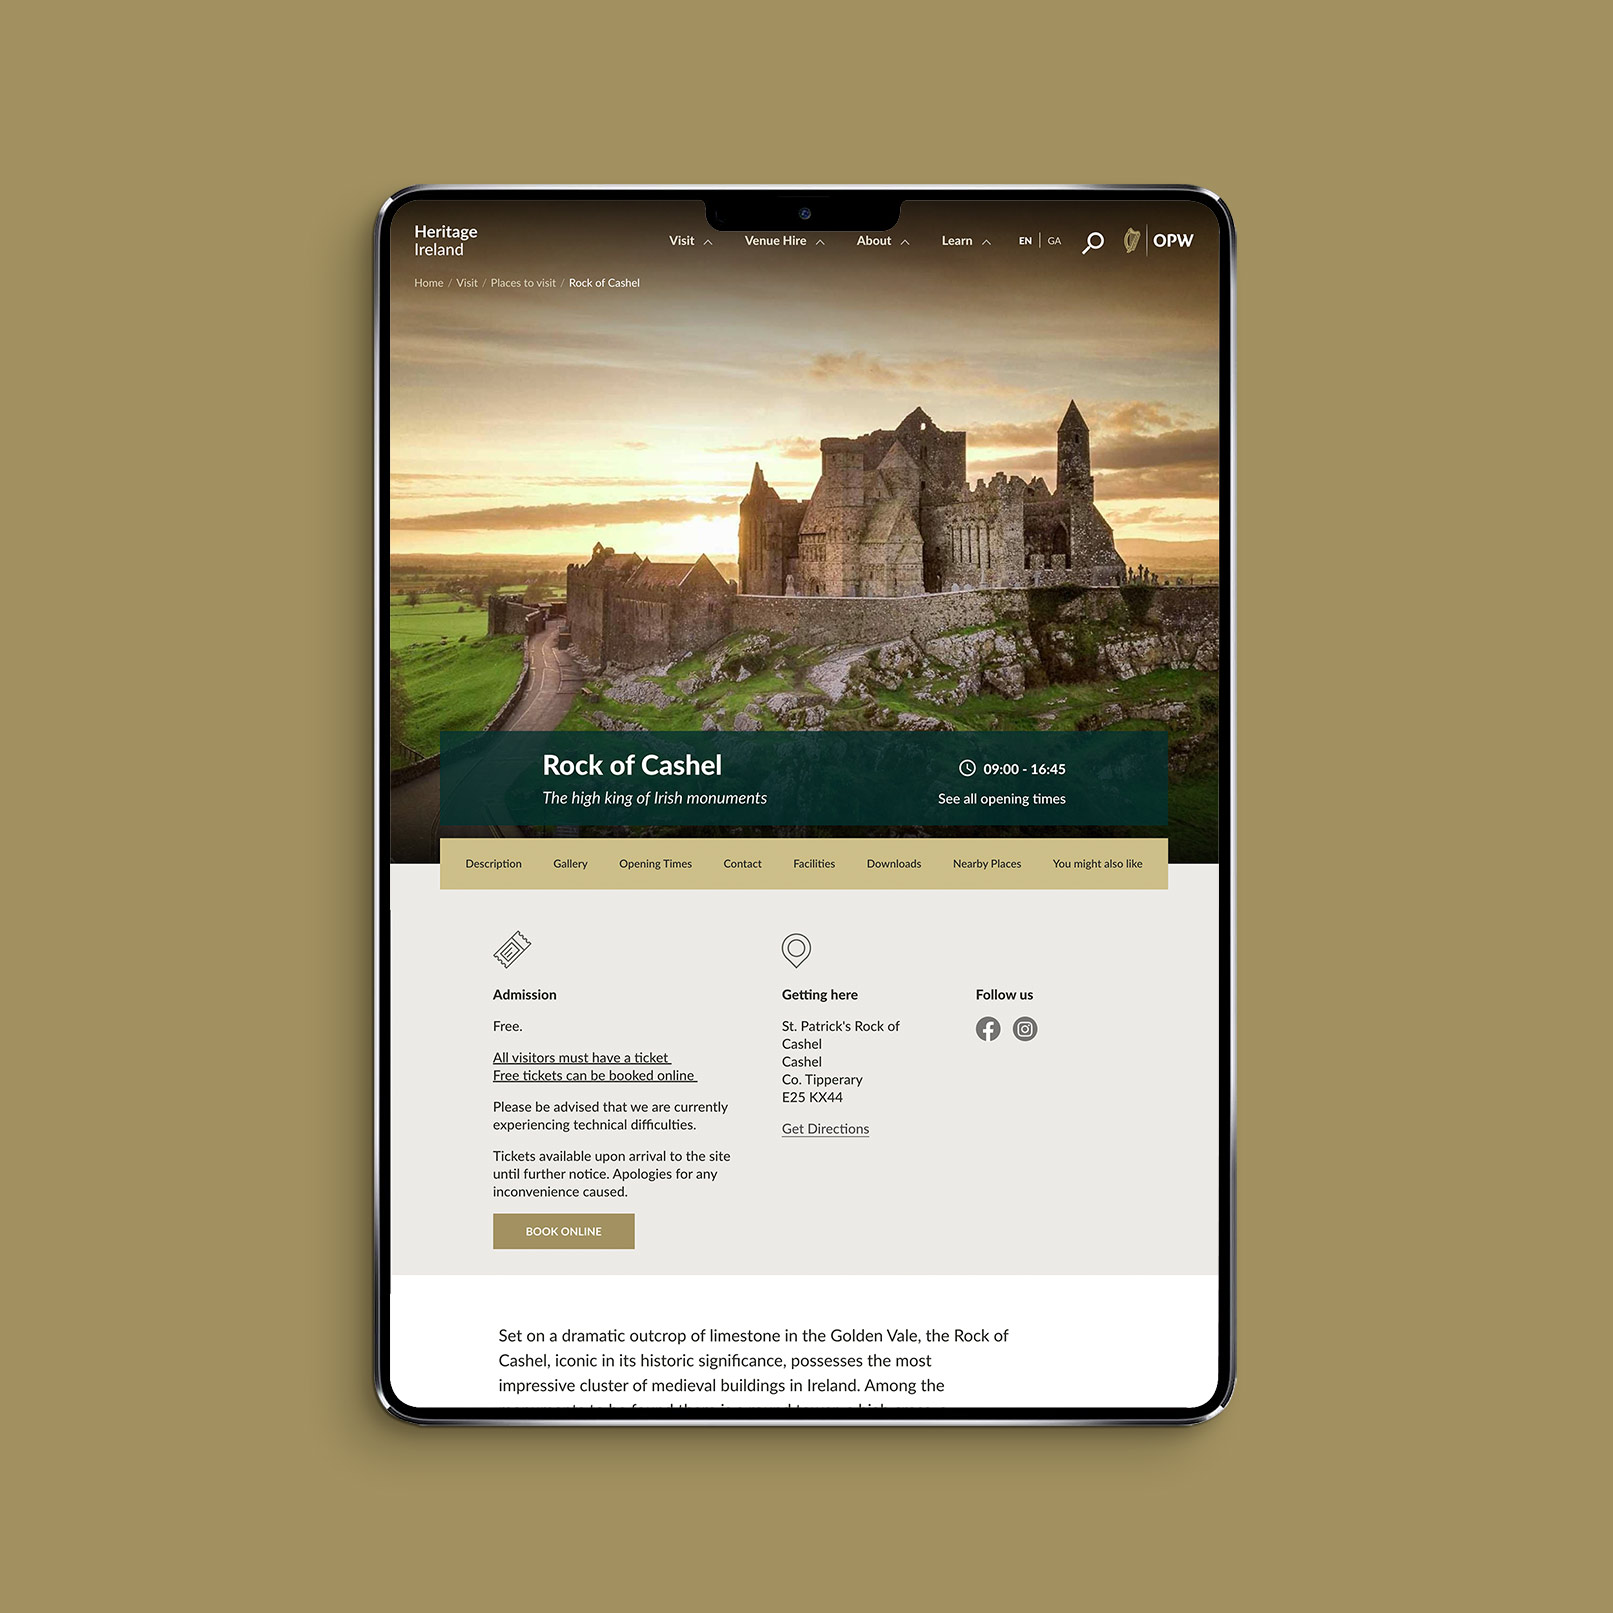 Image of the Rock of Cashel page on the Heritage Ireland website